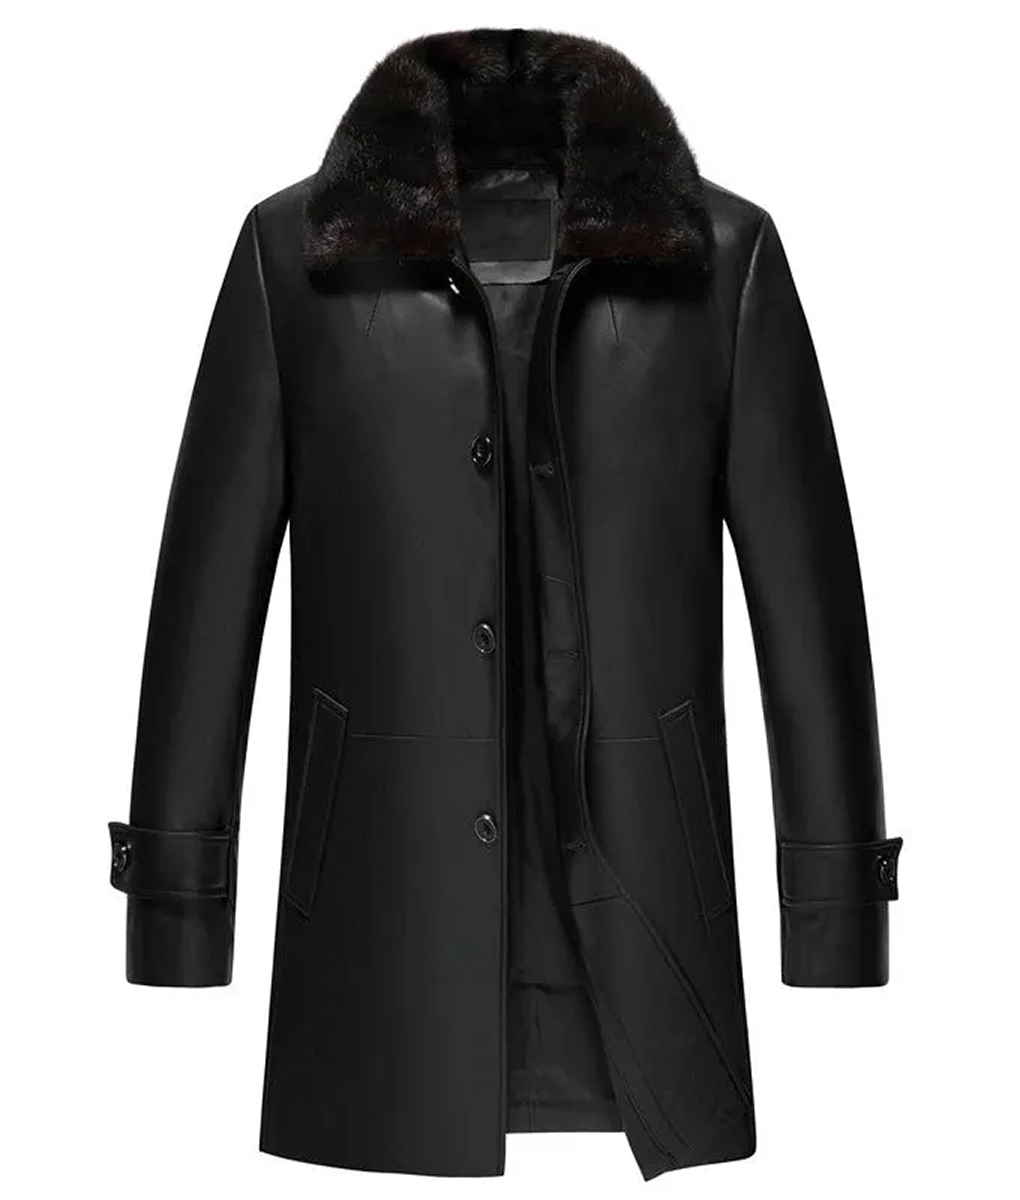 Mens Black Leather Coat - Leather Trench Coat